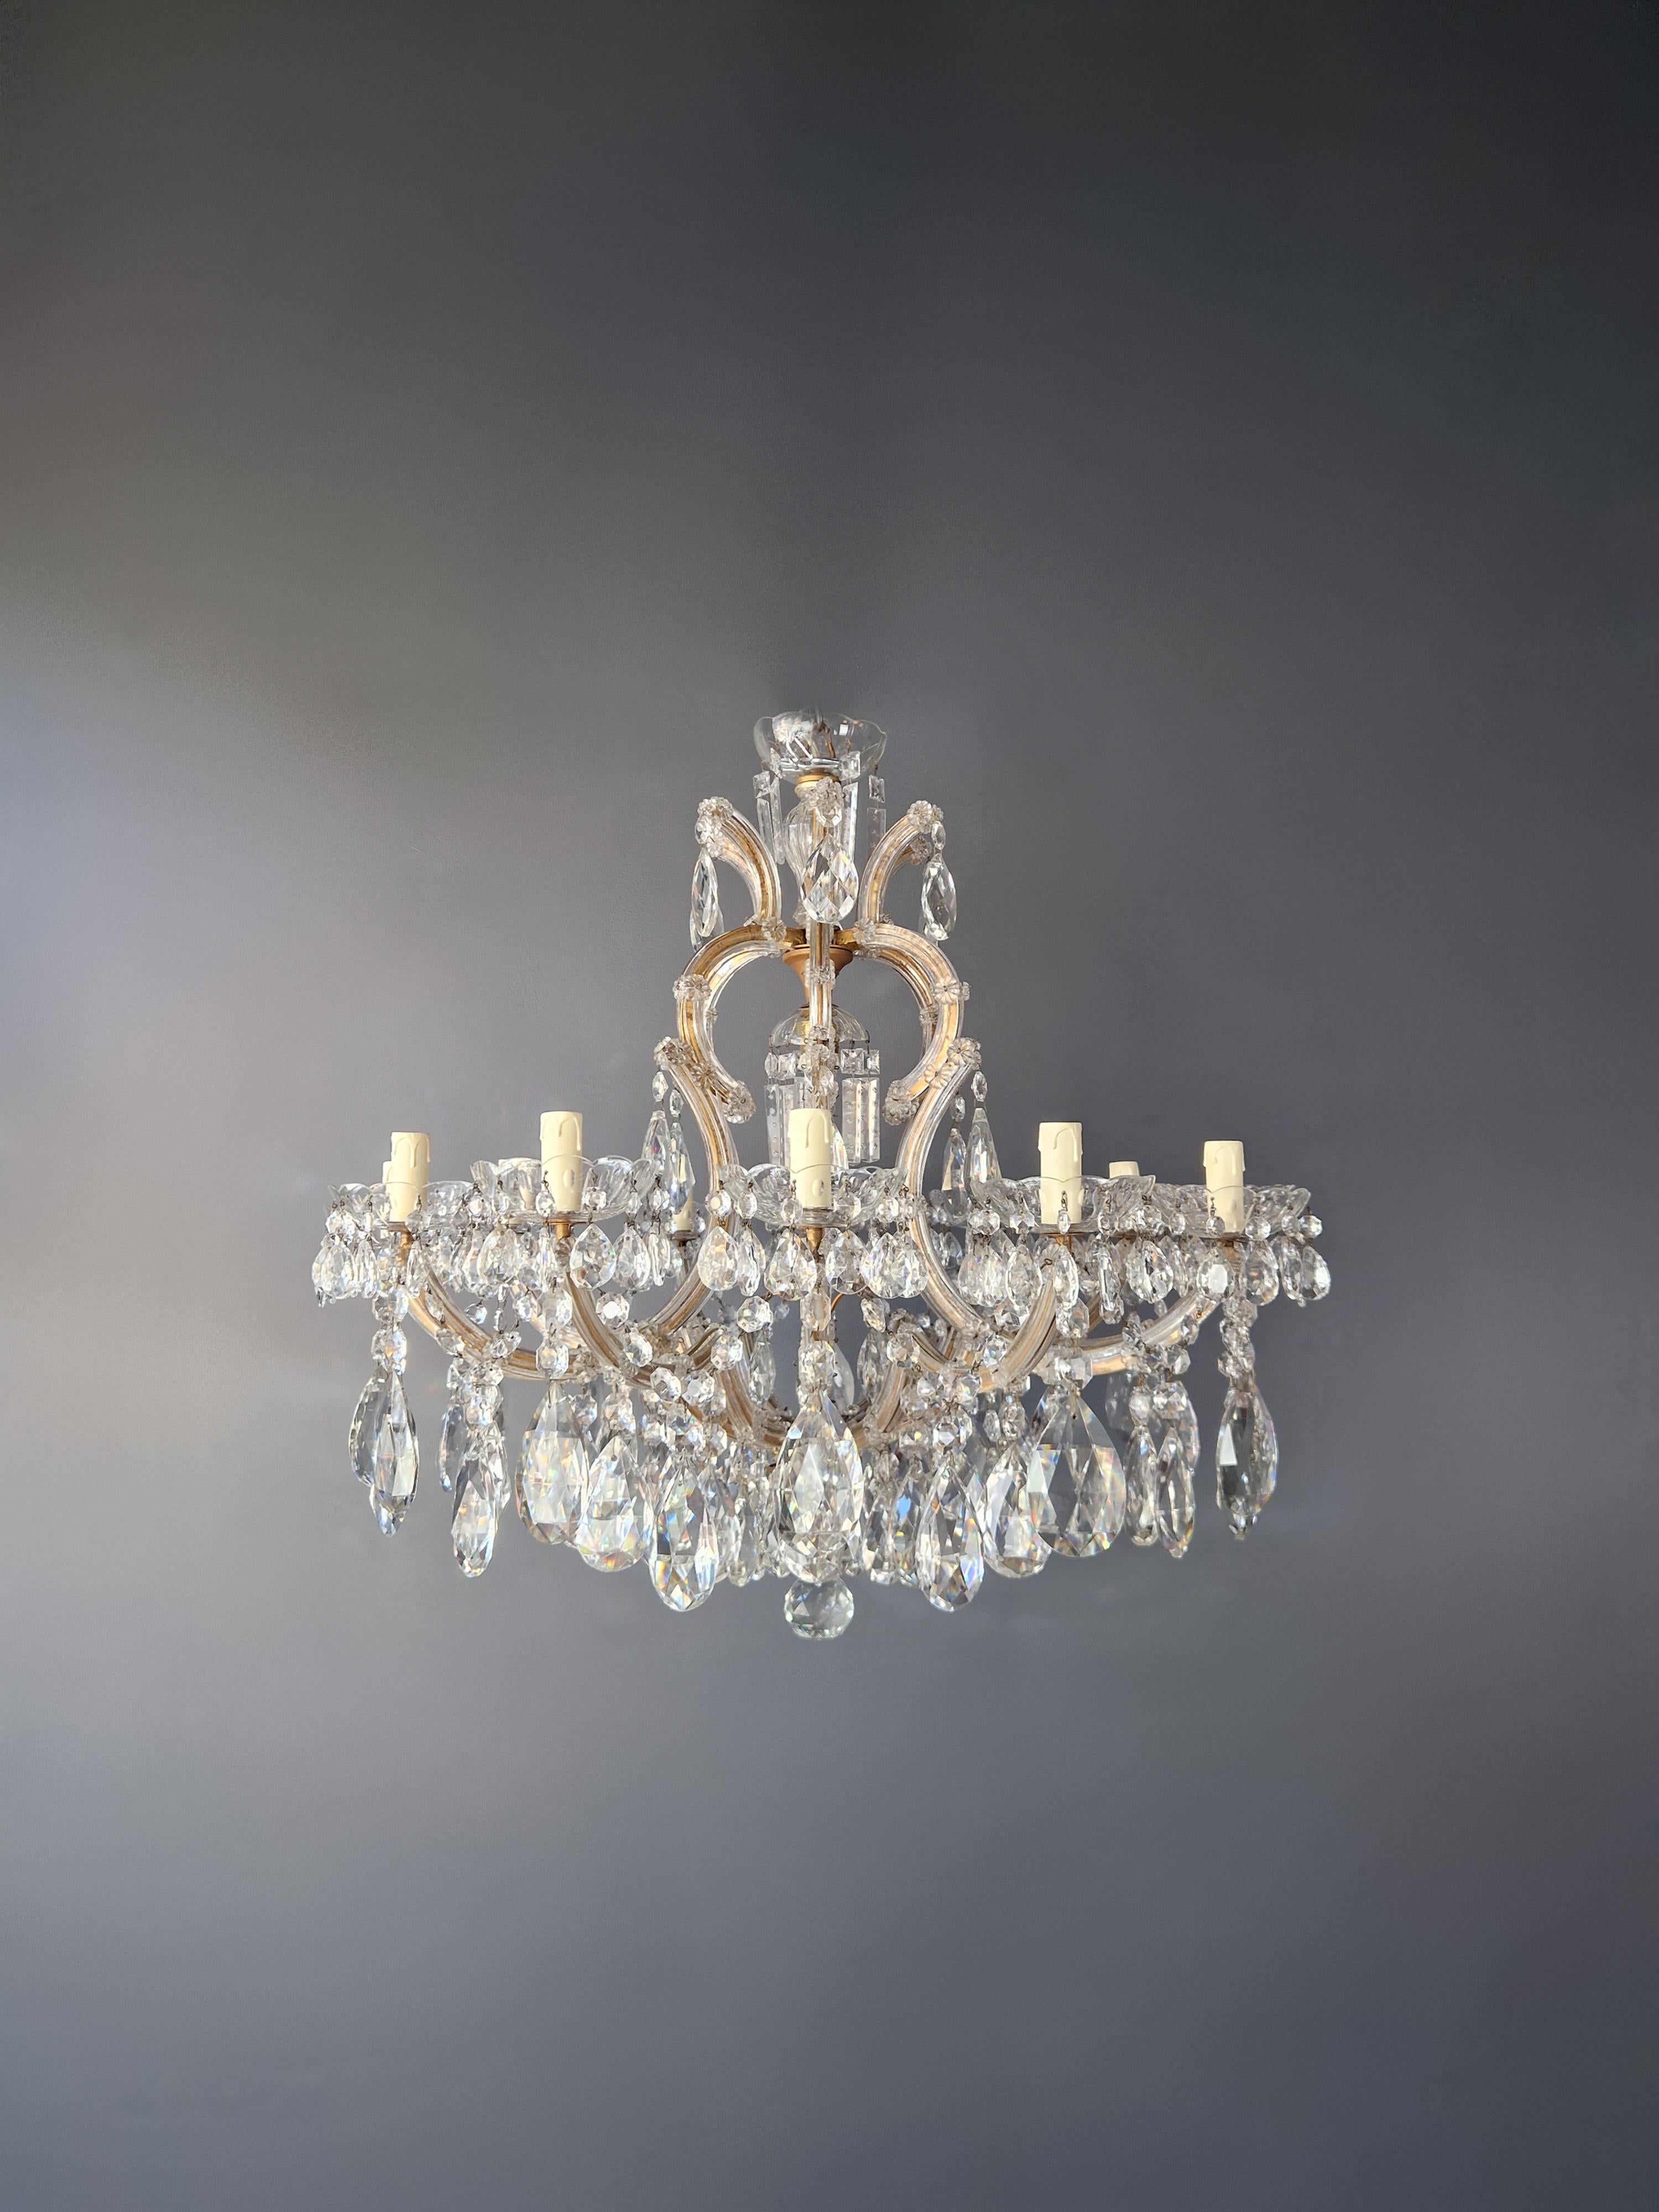 For sale is a stunning antique chandelier that has been professionally restored in Berlin. The chandelier has been meticulously re-wired and is now ready to be hung. Not a single crystal is missing, and the cabling and sockets have been completely